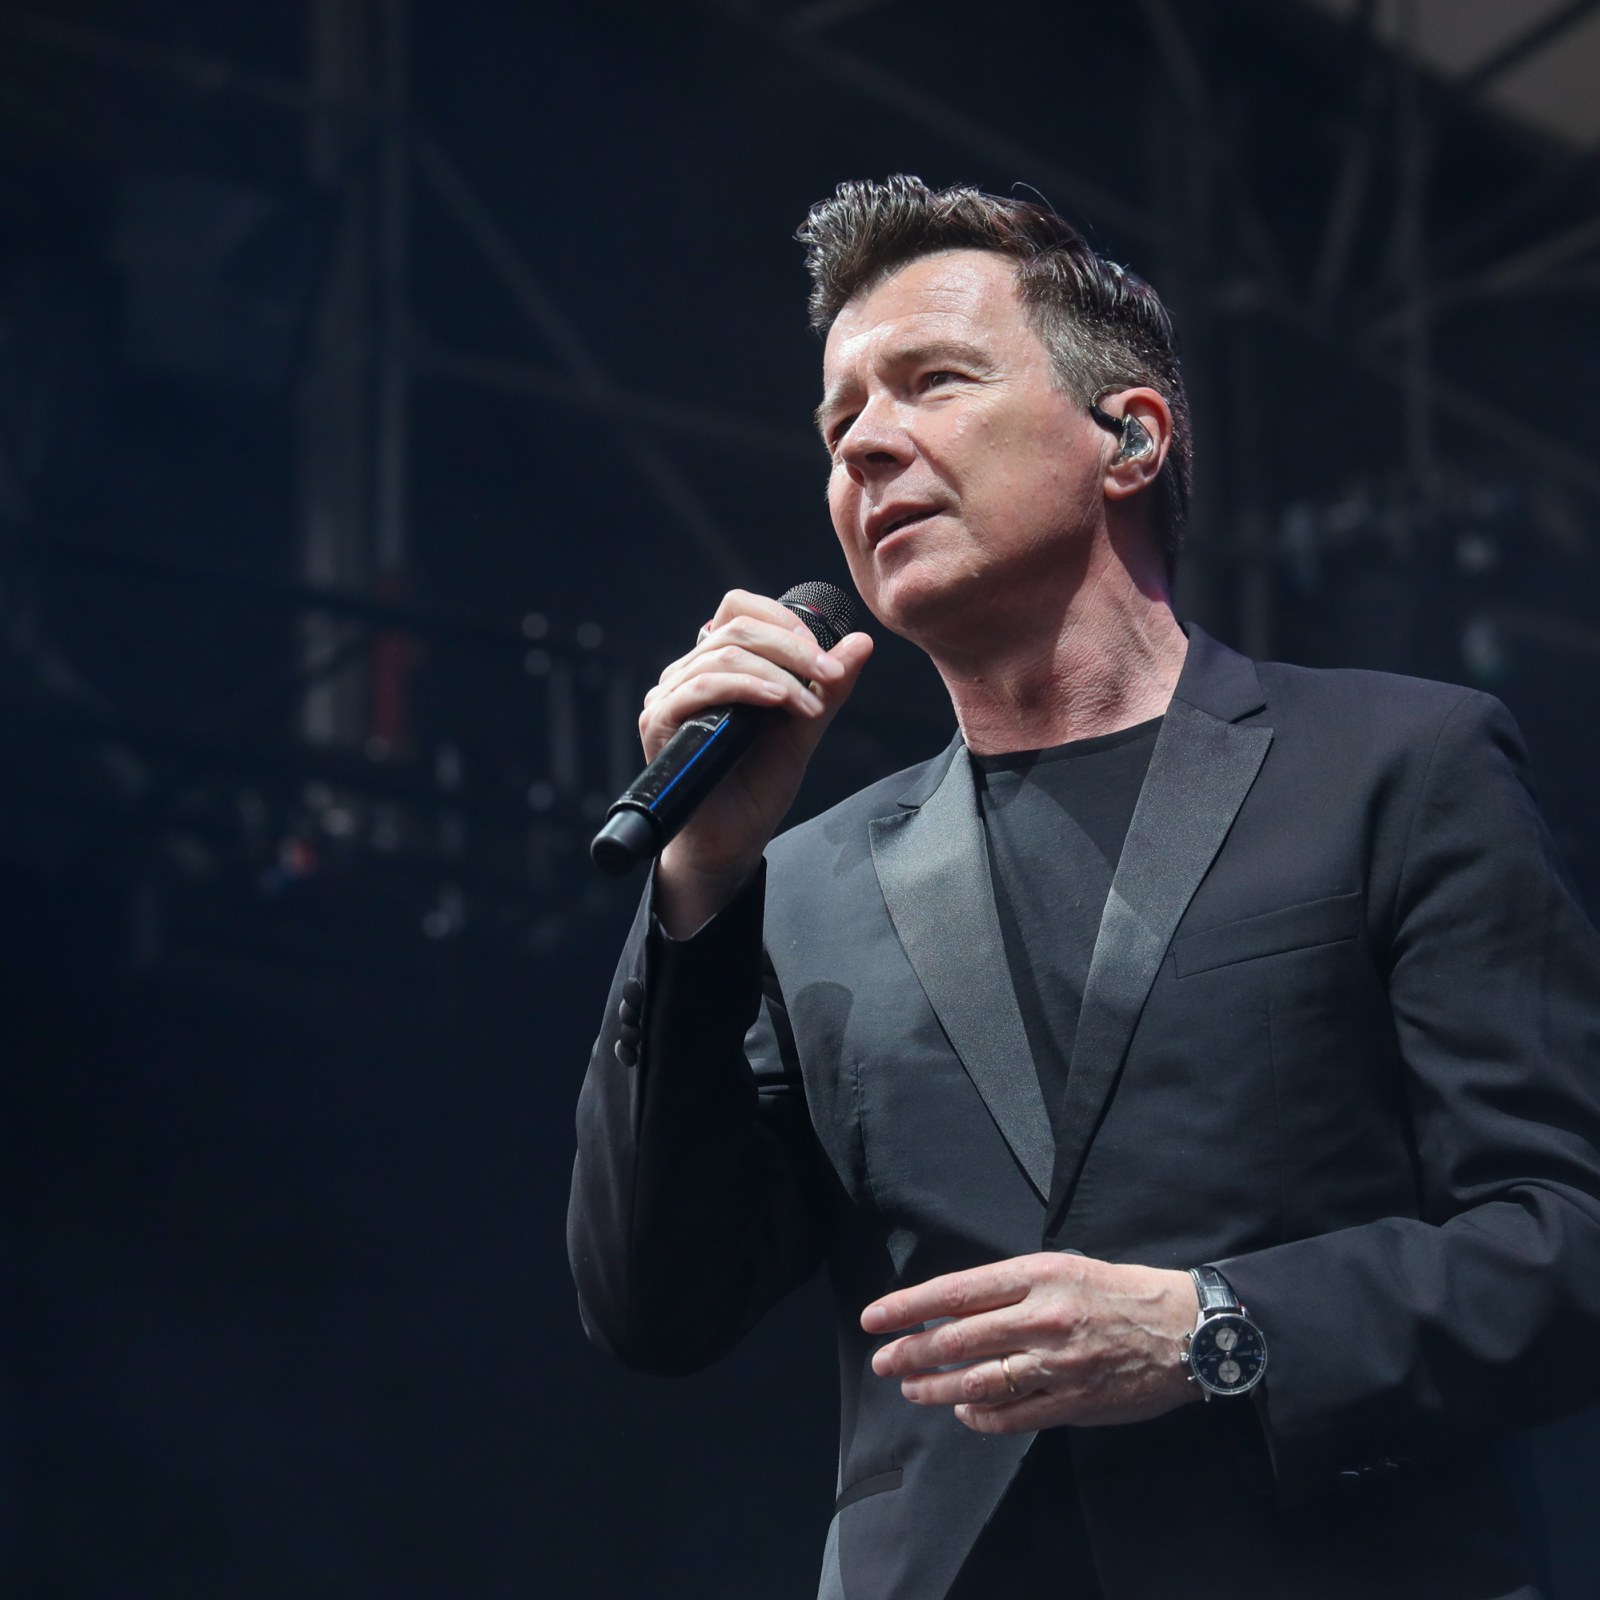 What does 'Rickrolled' mean on TikTok? - Quora